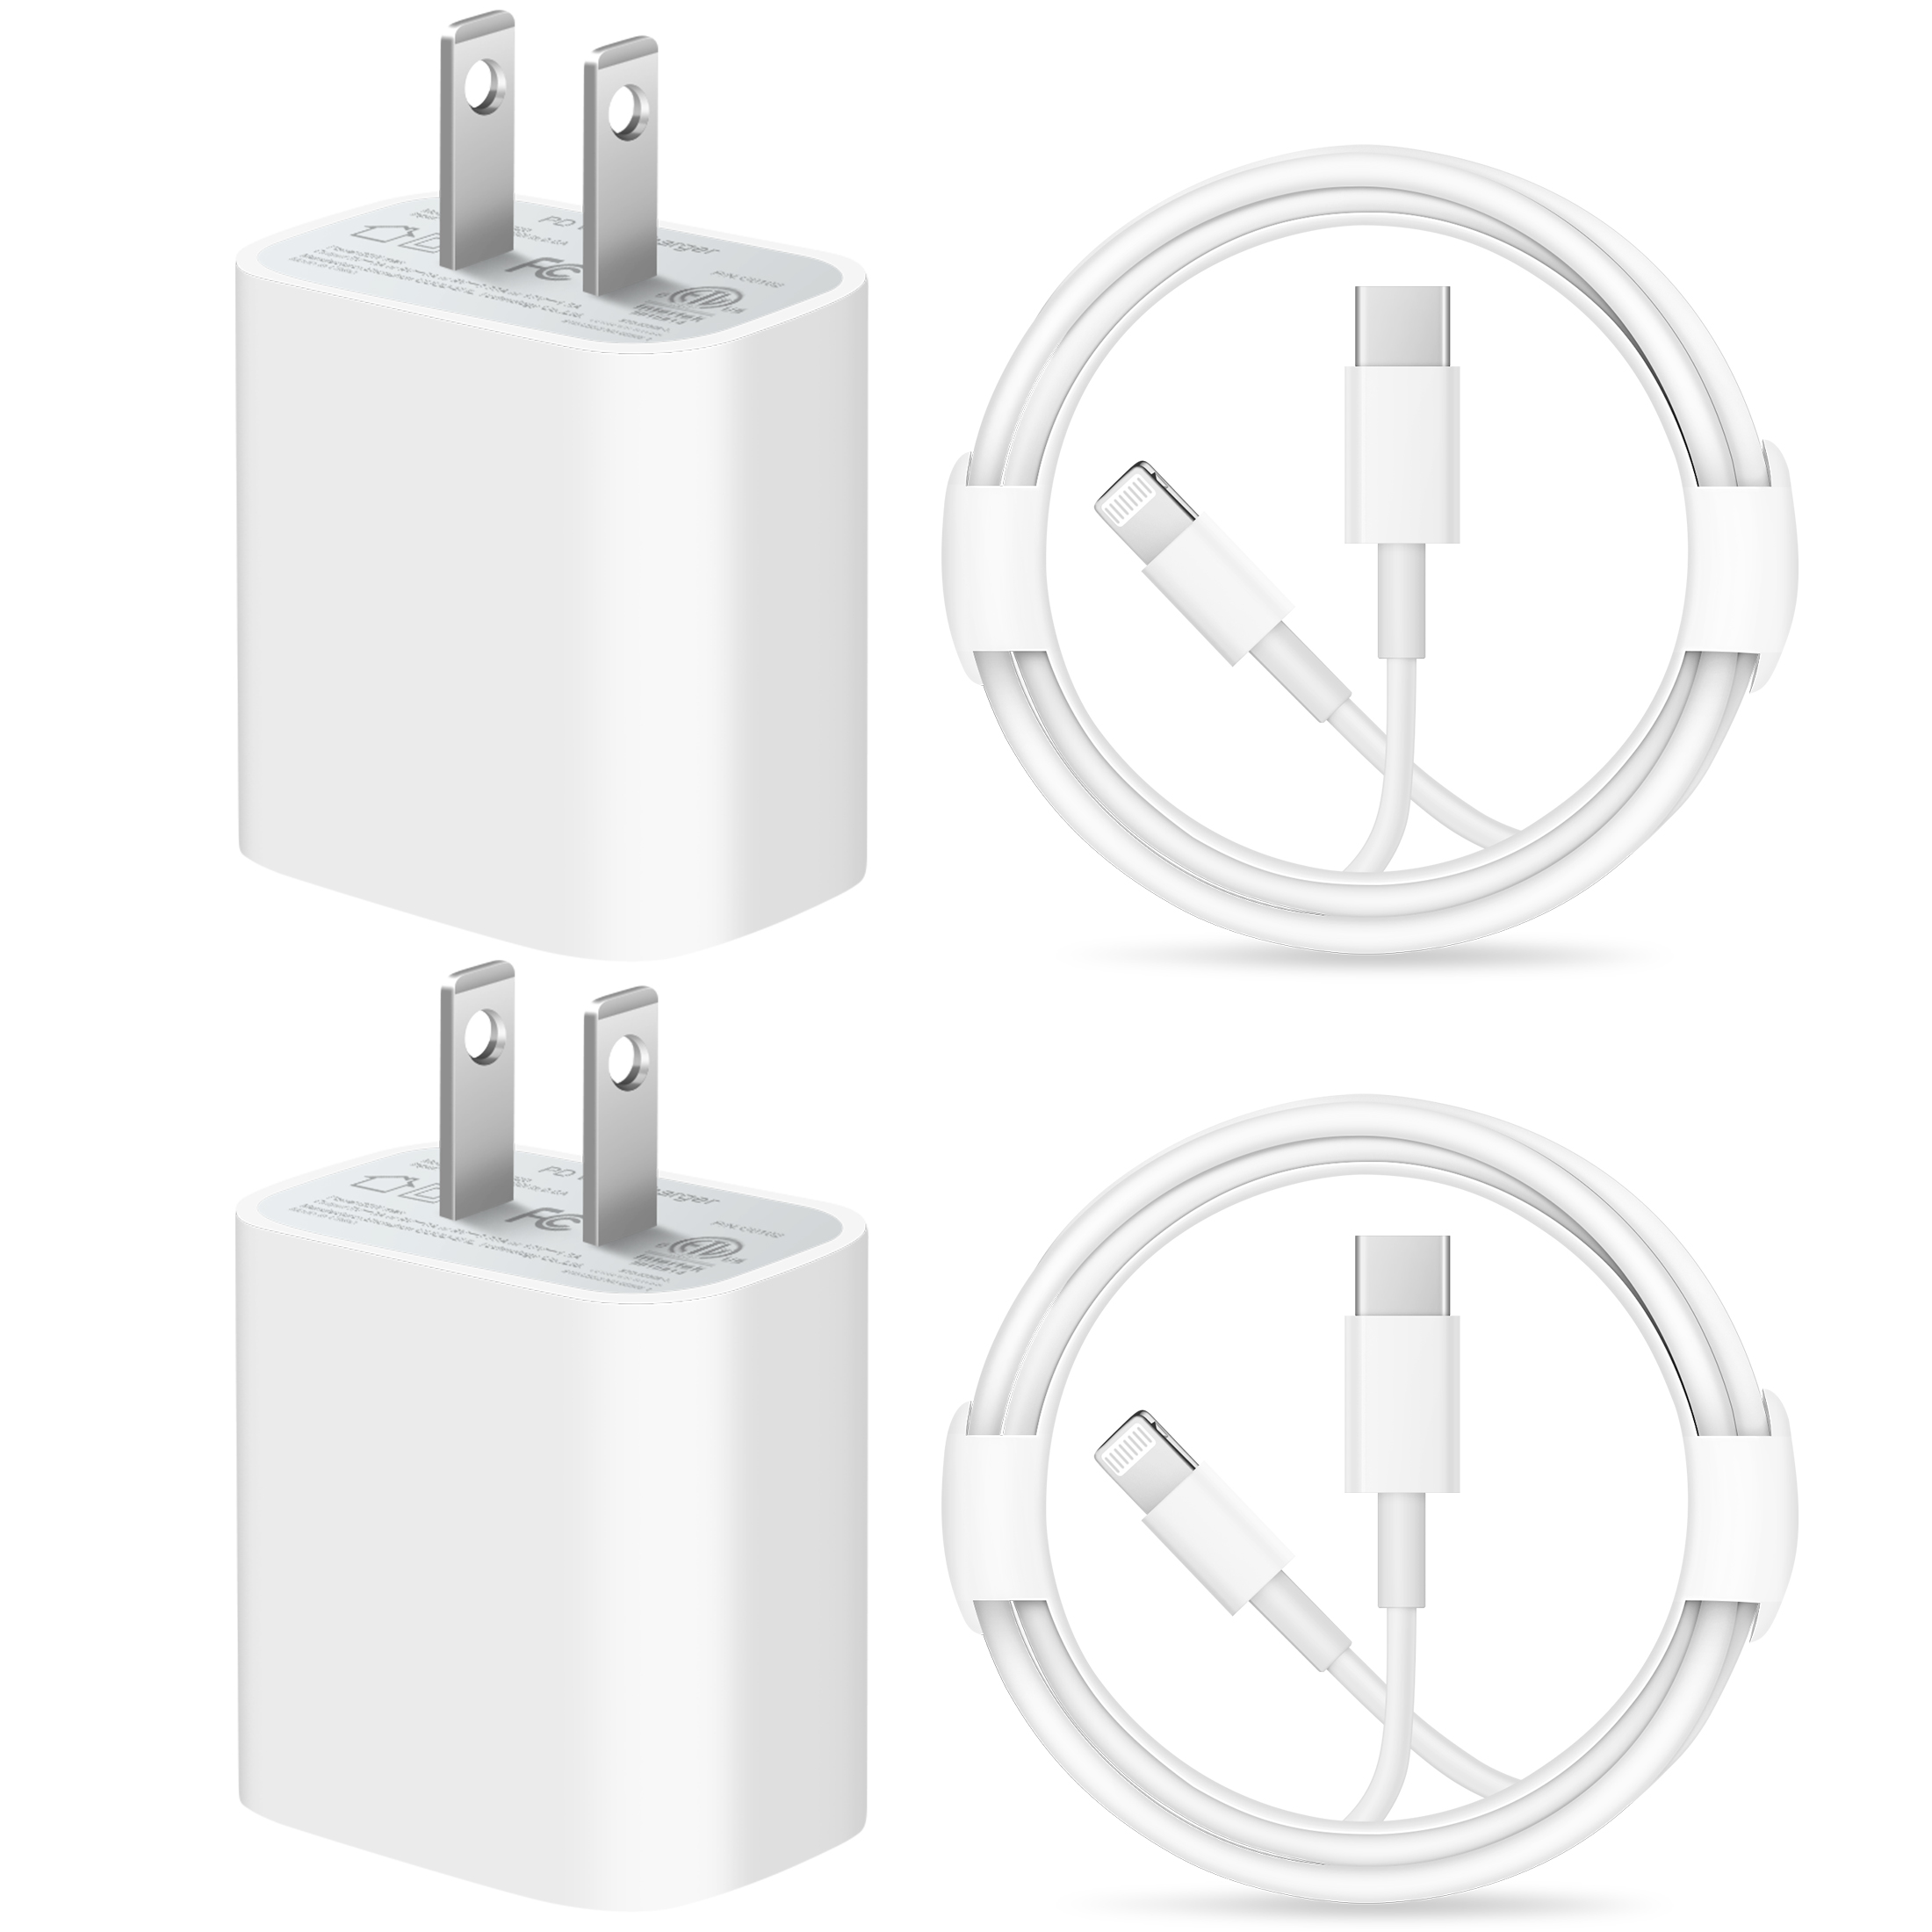 iPhone 14 13 12 11 Super Fast Charger-Apple MFi Certified-High Speed iPhone Charger-6FT Wall Charger-2-Pack 20W PD USB C Compatible with iPhone 14/14Pro/13/13 Pro/12/12Pro/XS/Max/XR/X/8/8 Plus - image 1 of 8